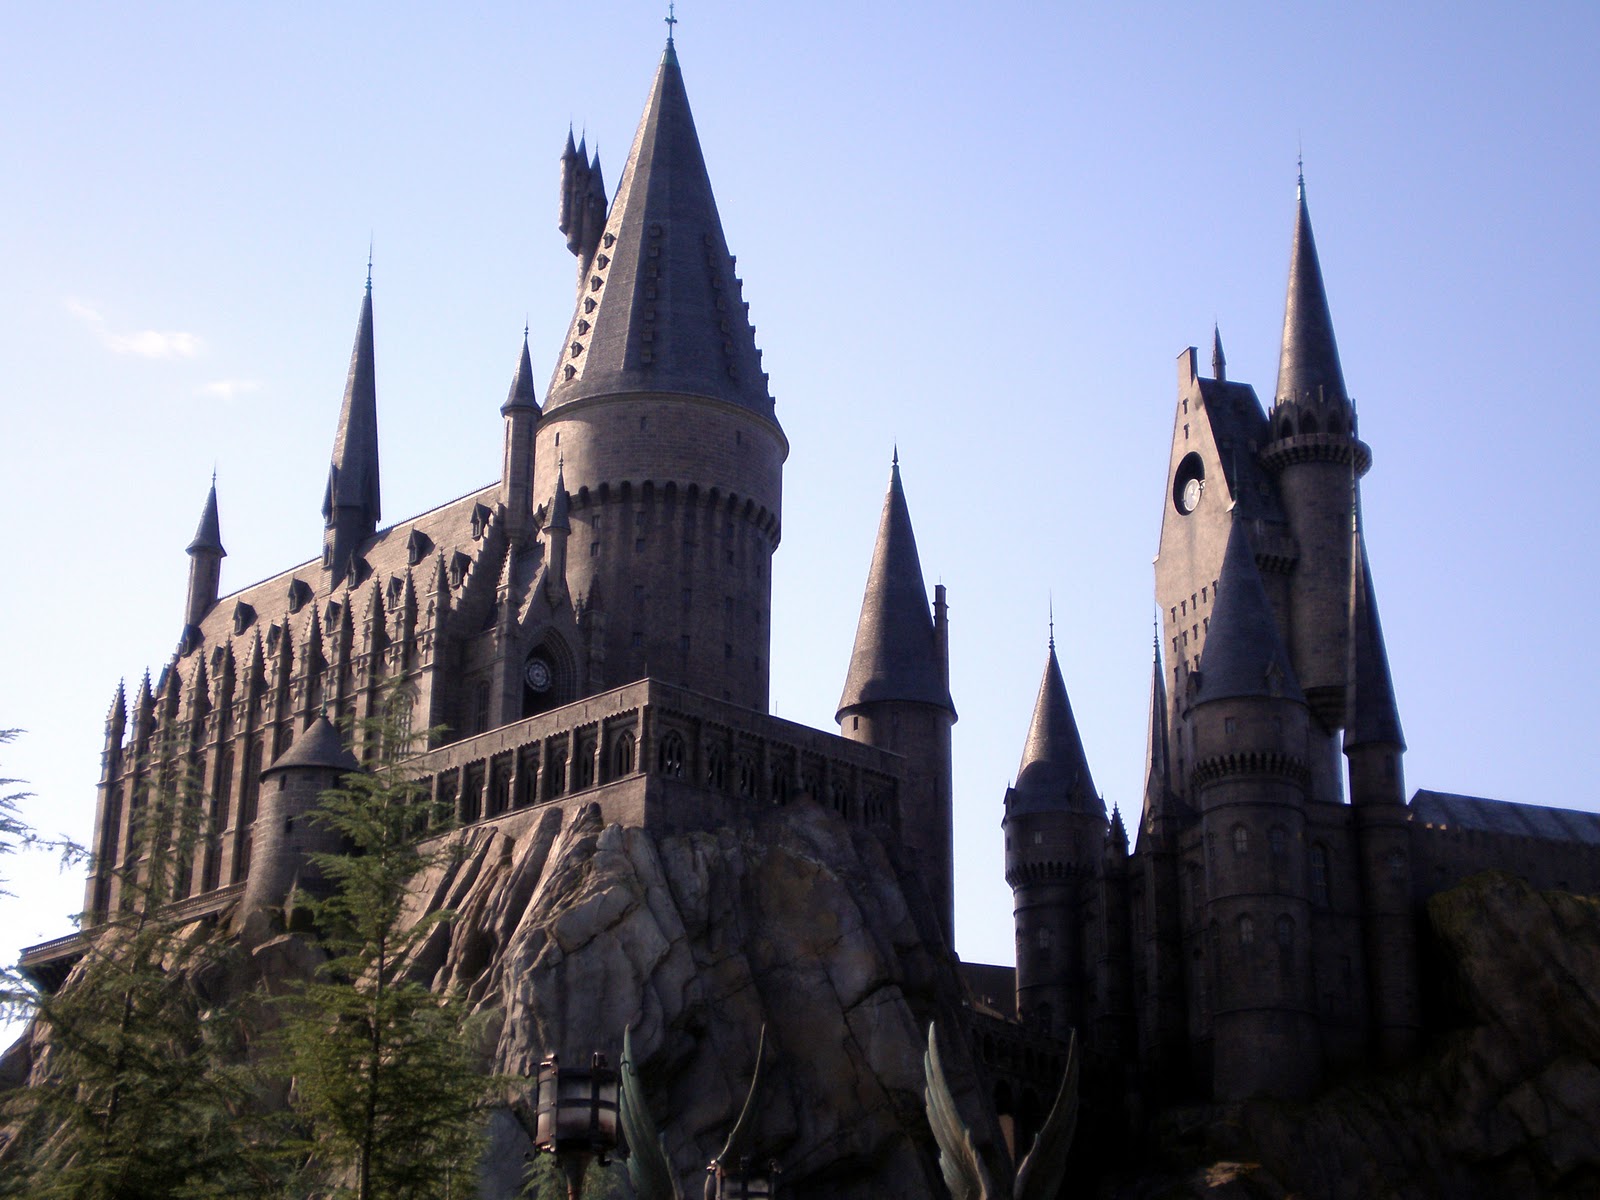 Tracy's Toys (and Some Other Stuff): More Views of Harry Potter Land